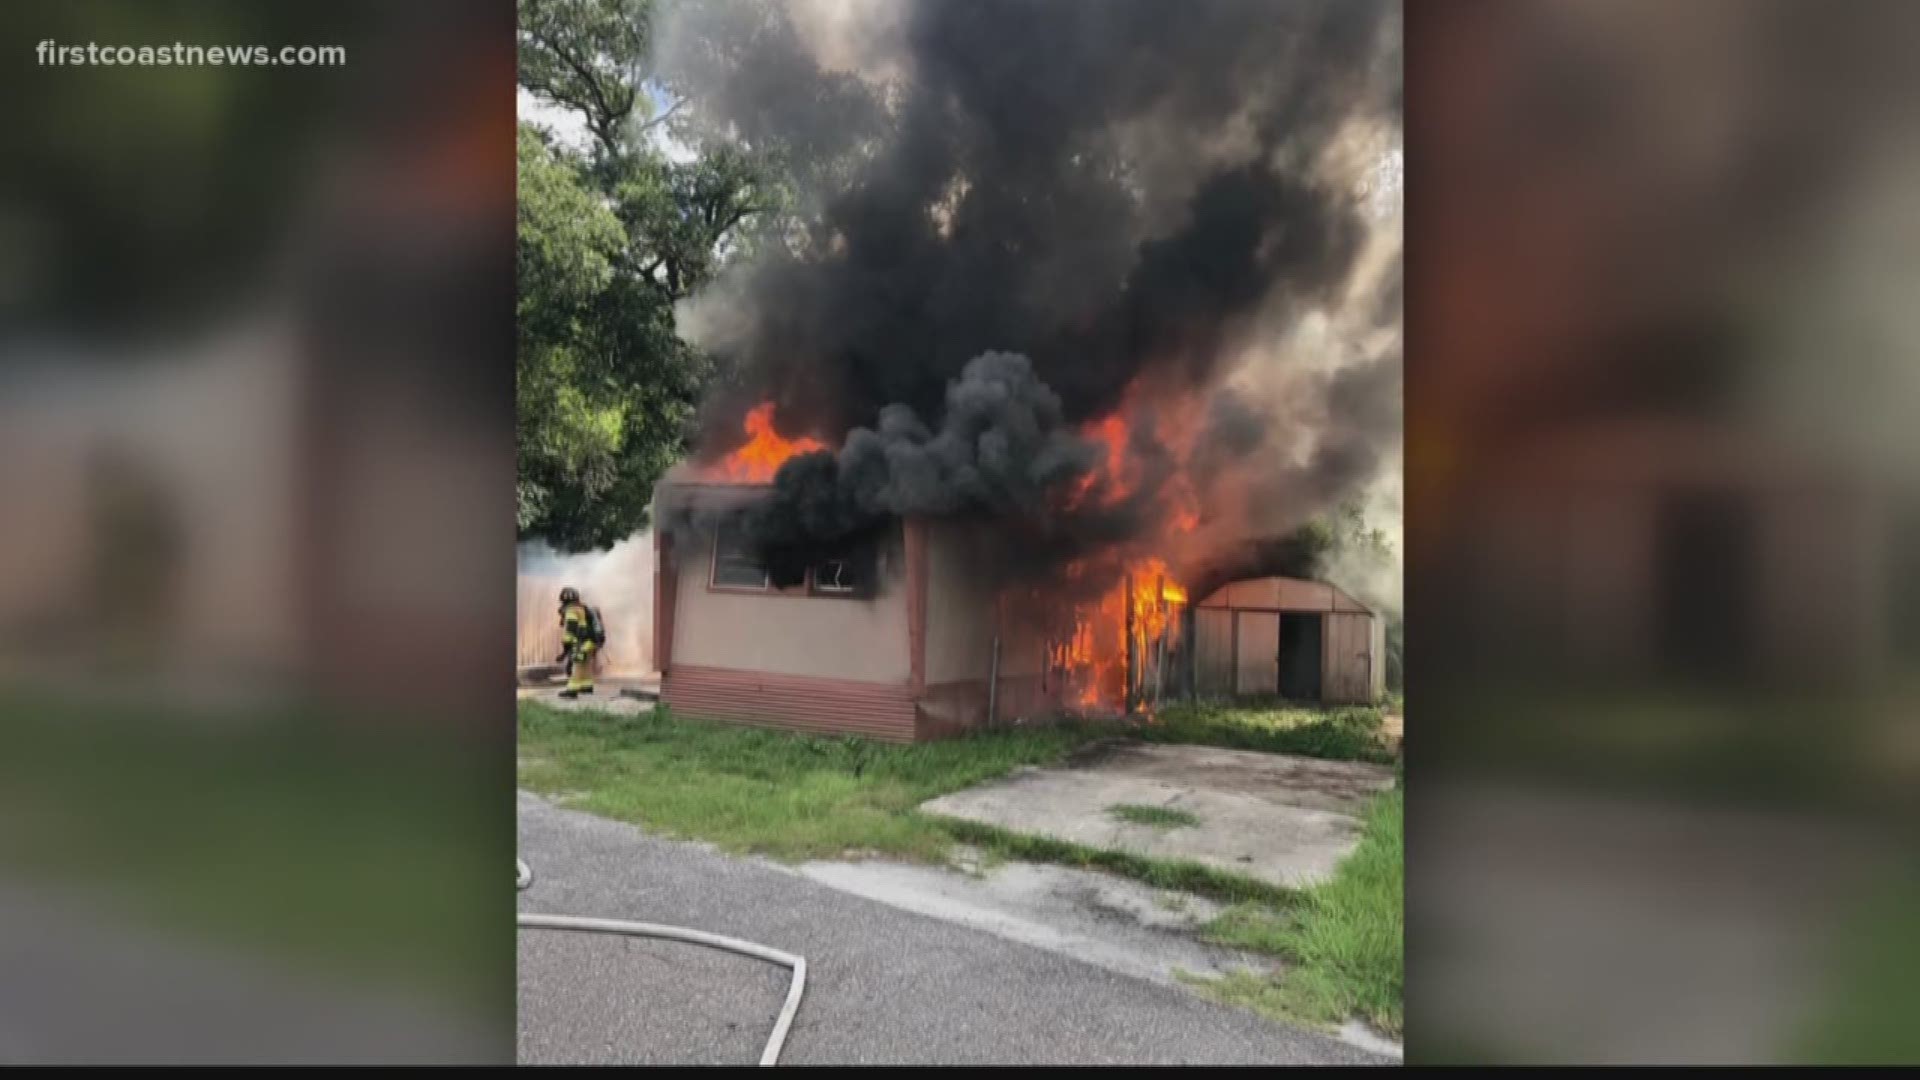 The Jacksonville Fire and Rescue Department responded to a mobile home fire Saturday afternoon in the Brentwood area.